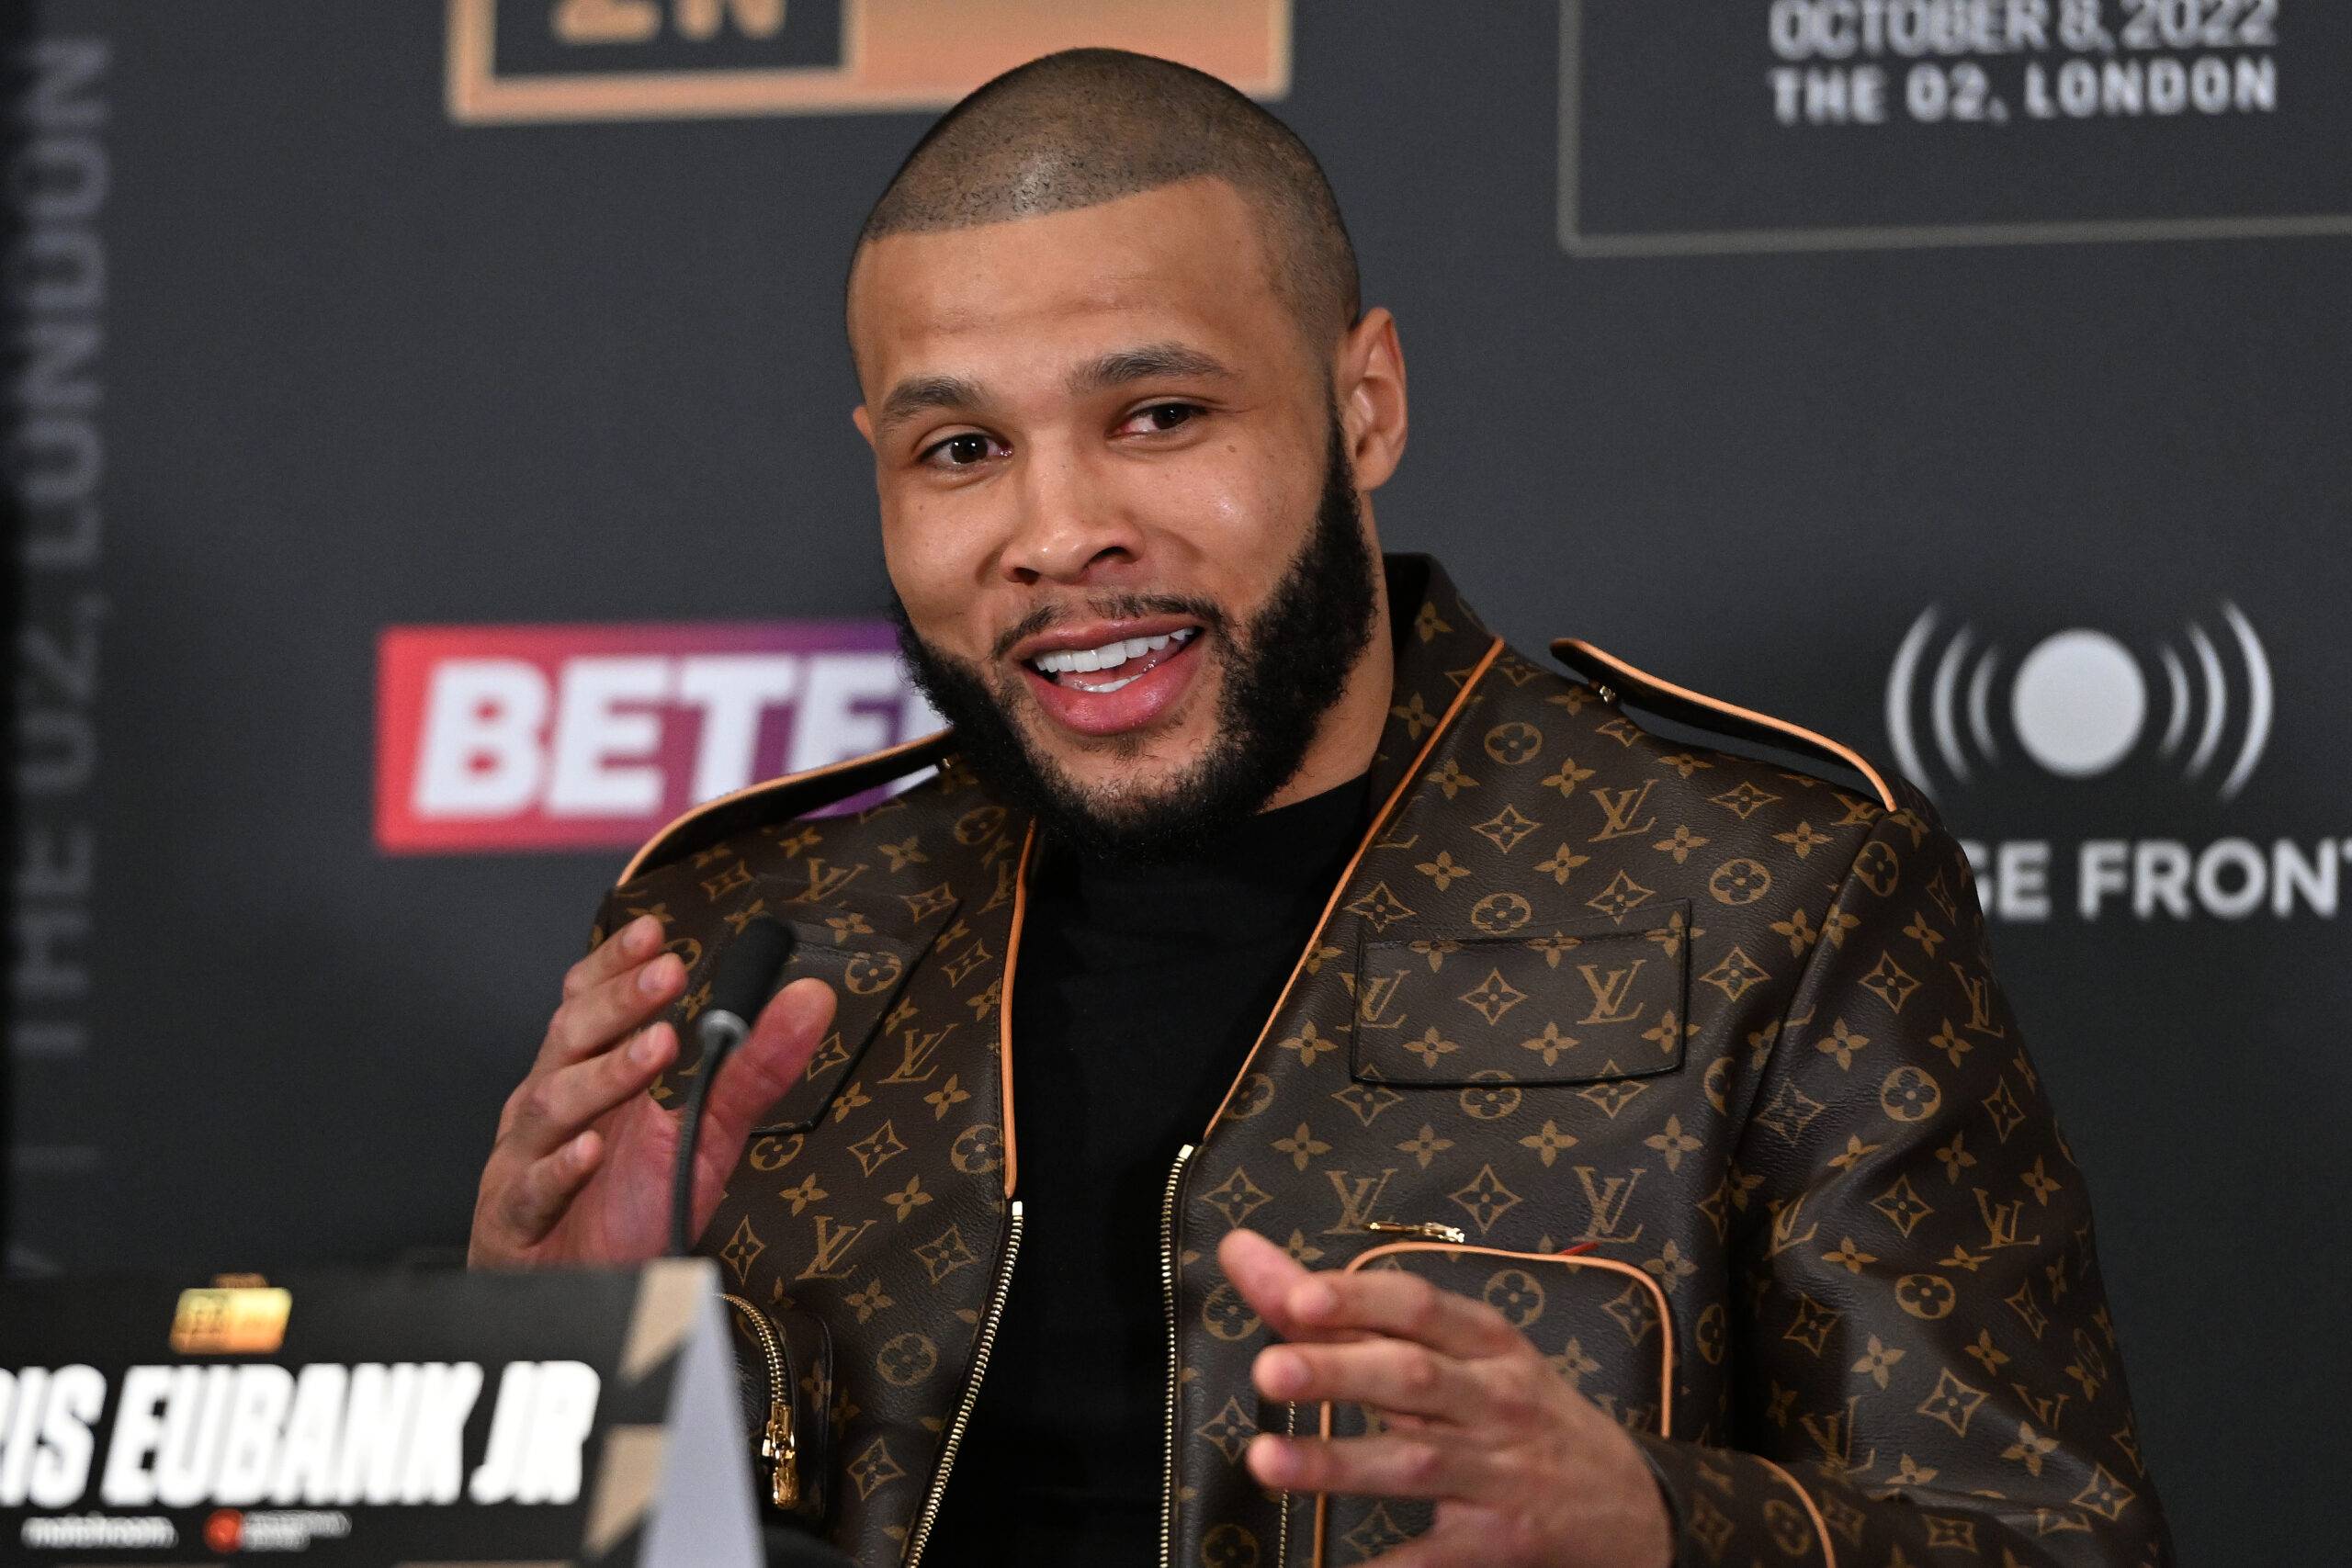 Chris Eubank Jr has revealed his next three potential opponents as he prepares to face Conor Benn